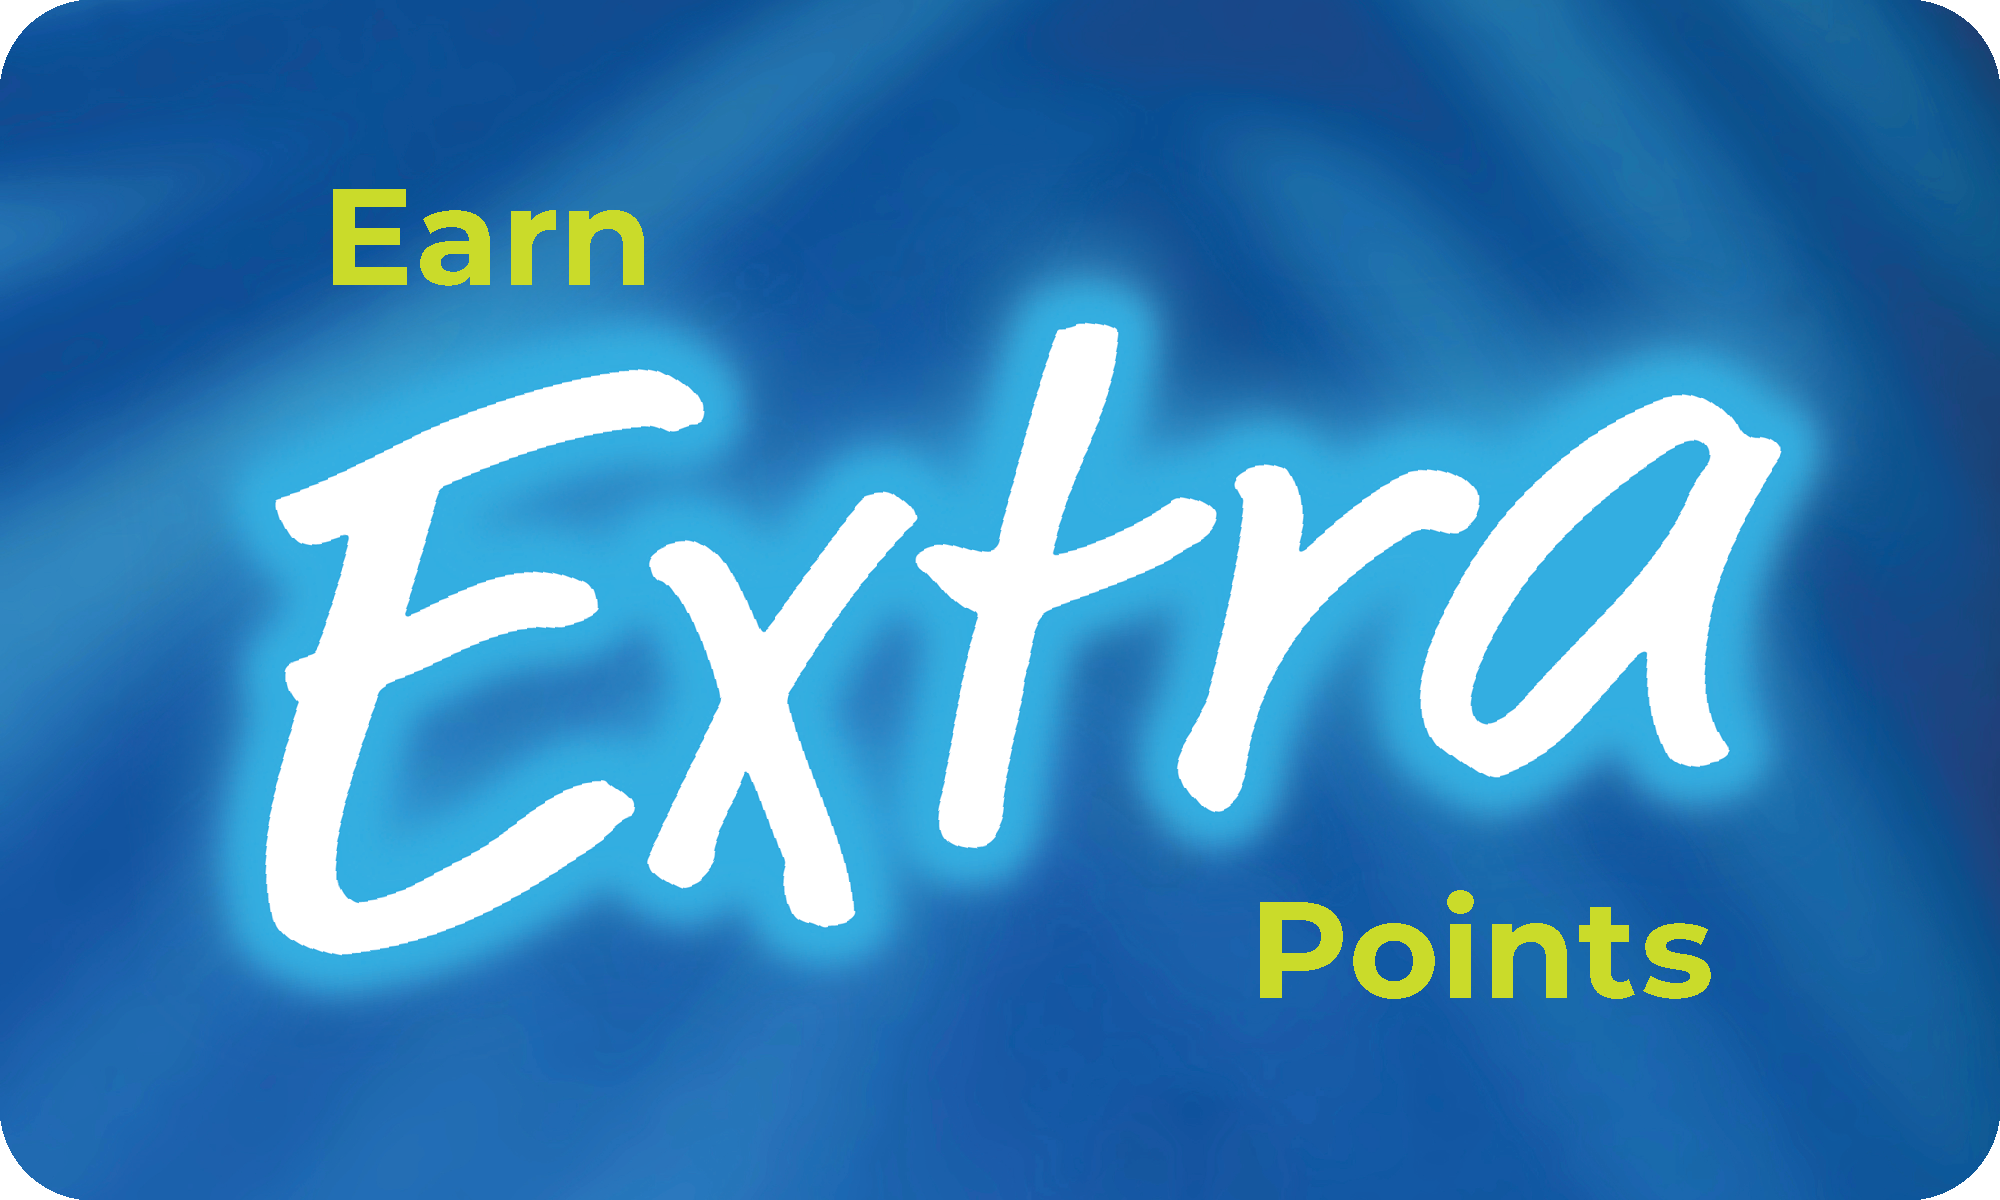 earn extra points